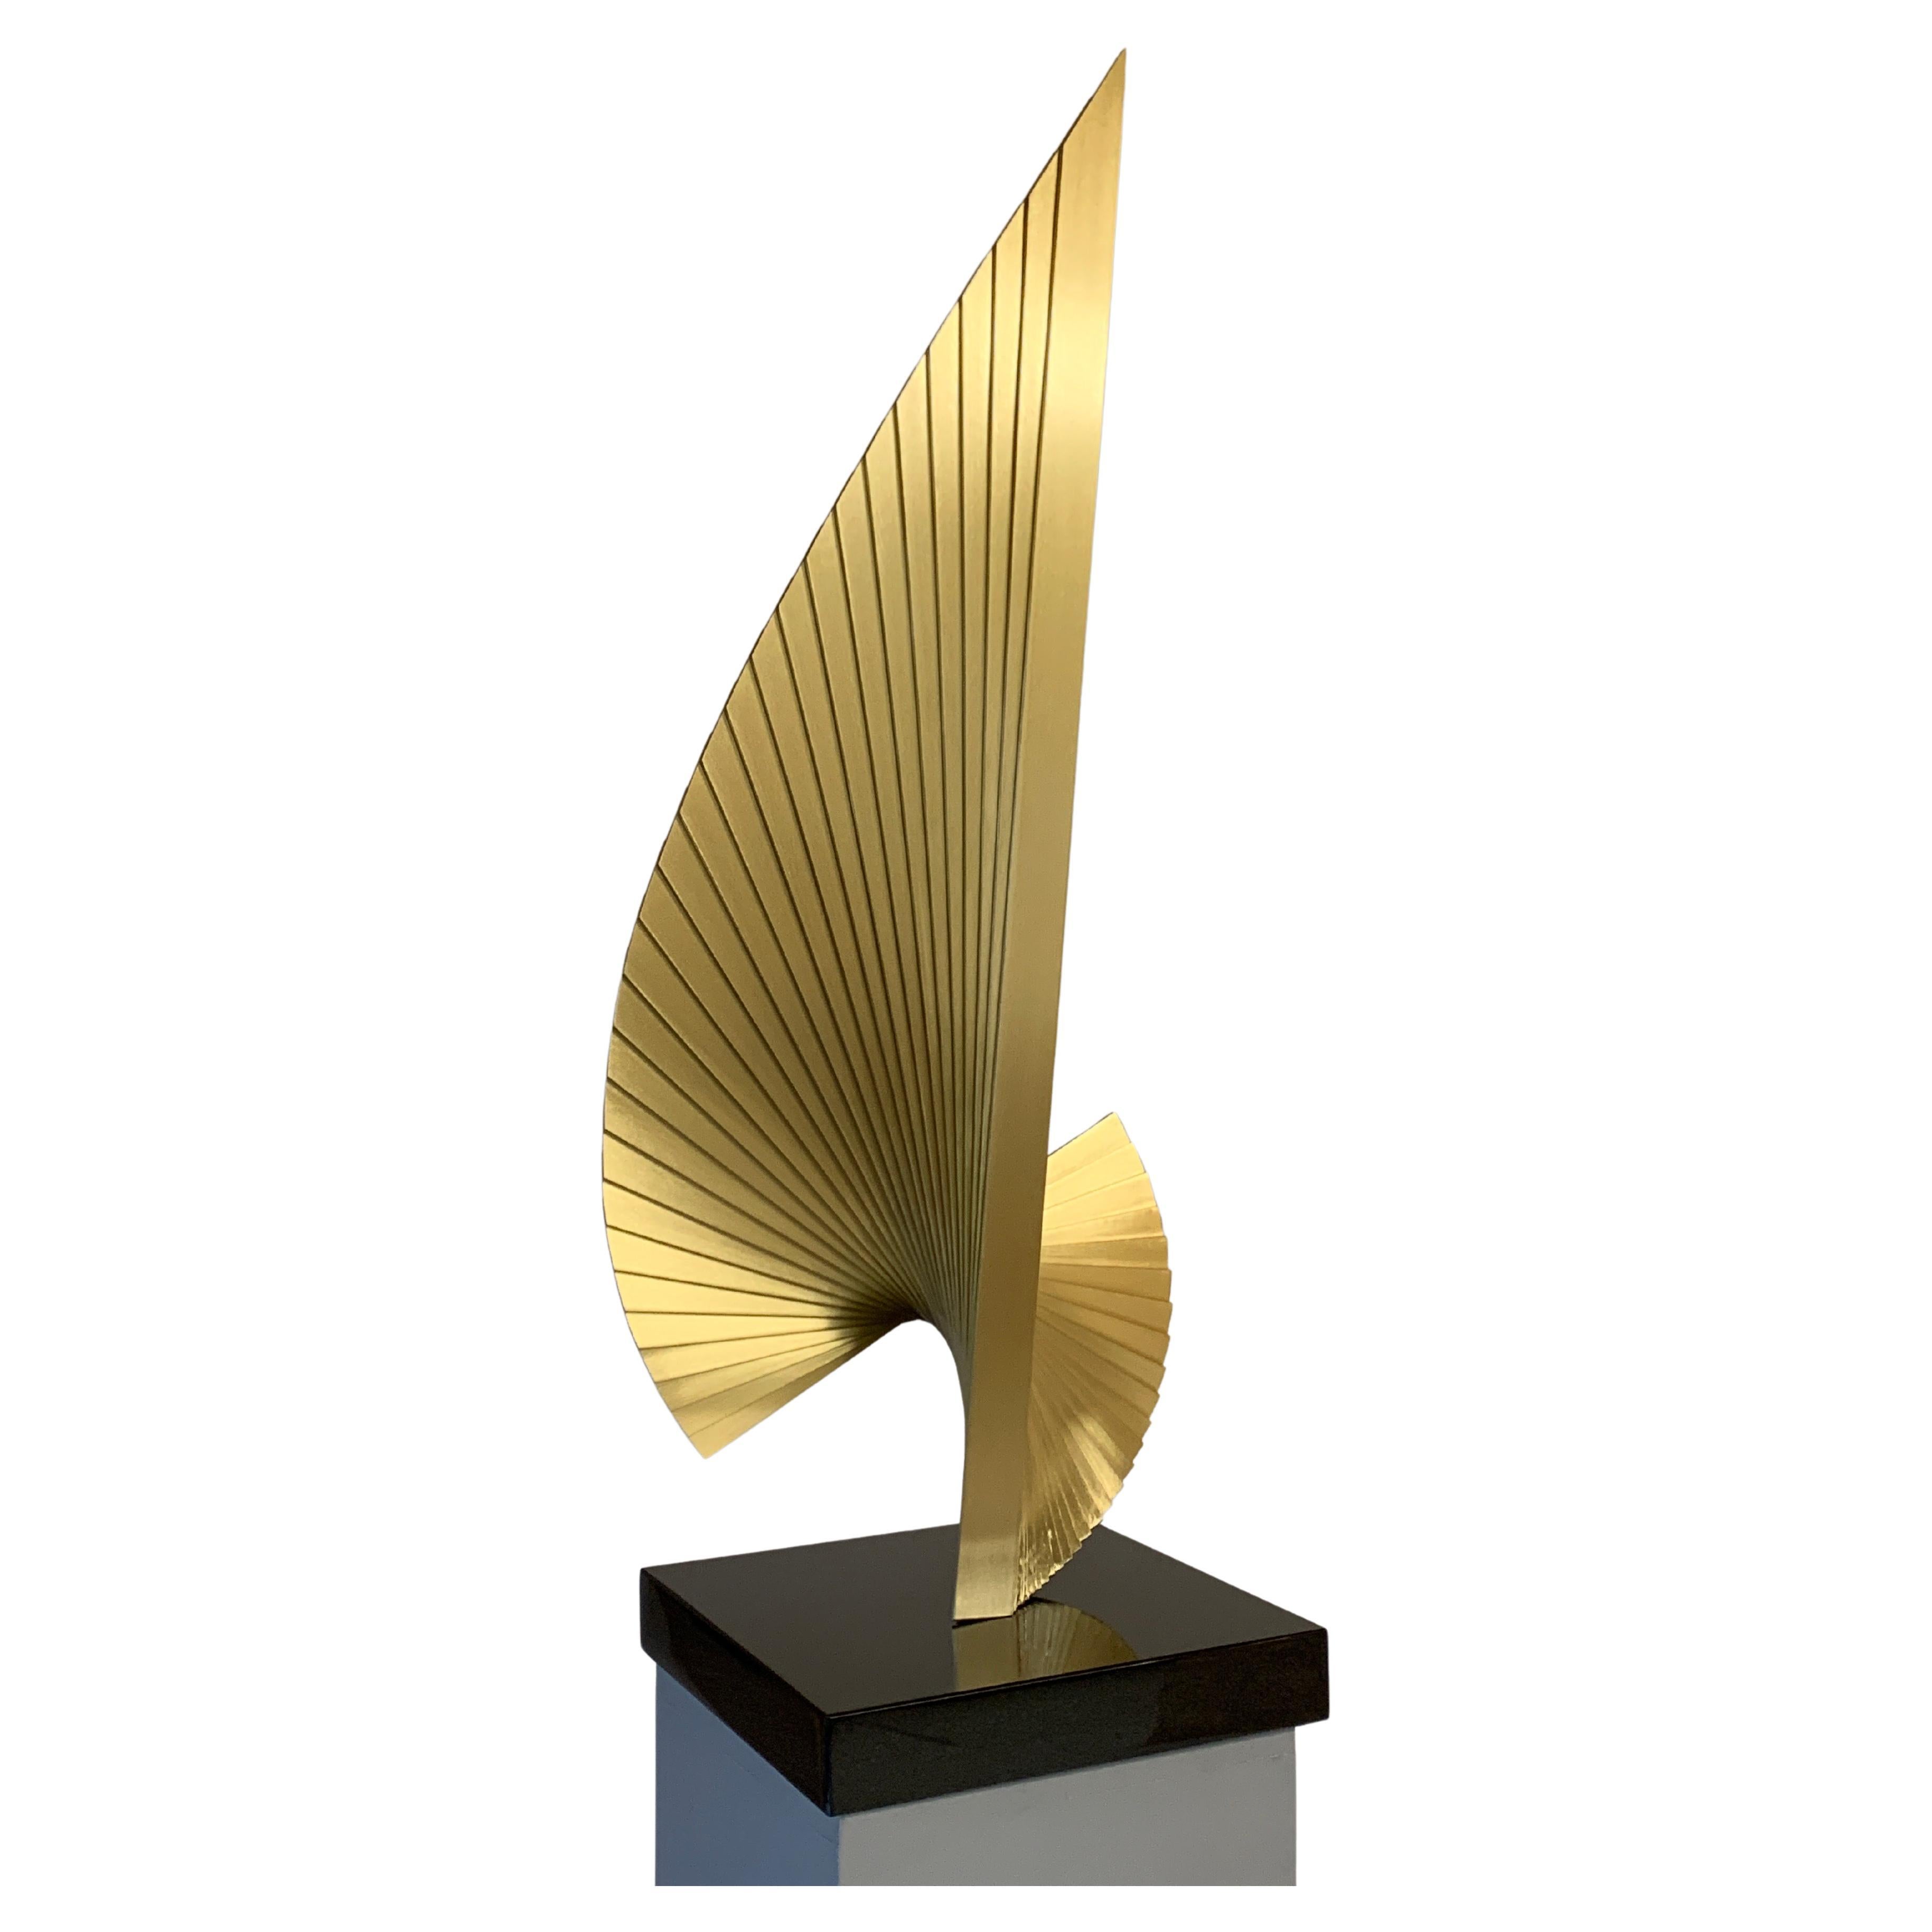 Tabletop sculpture in brushed brass inspired by proportions of the Golden Ratio